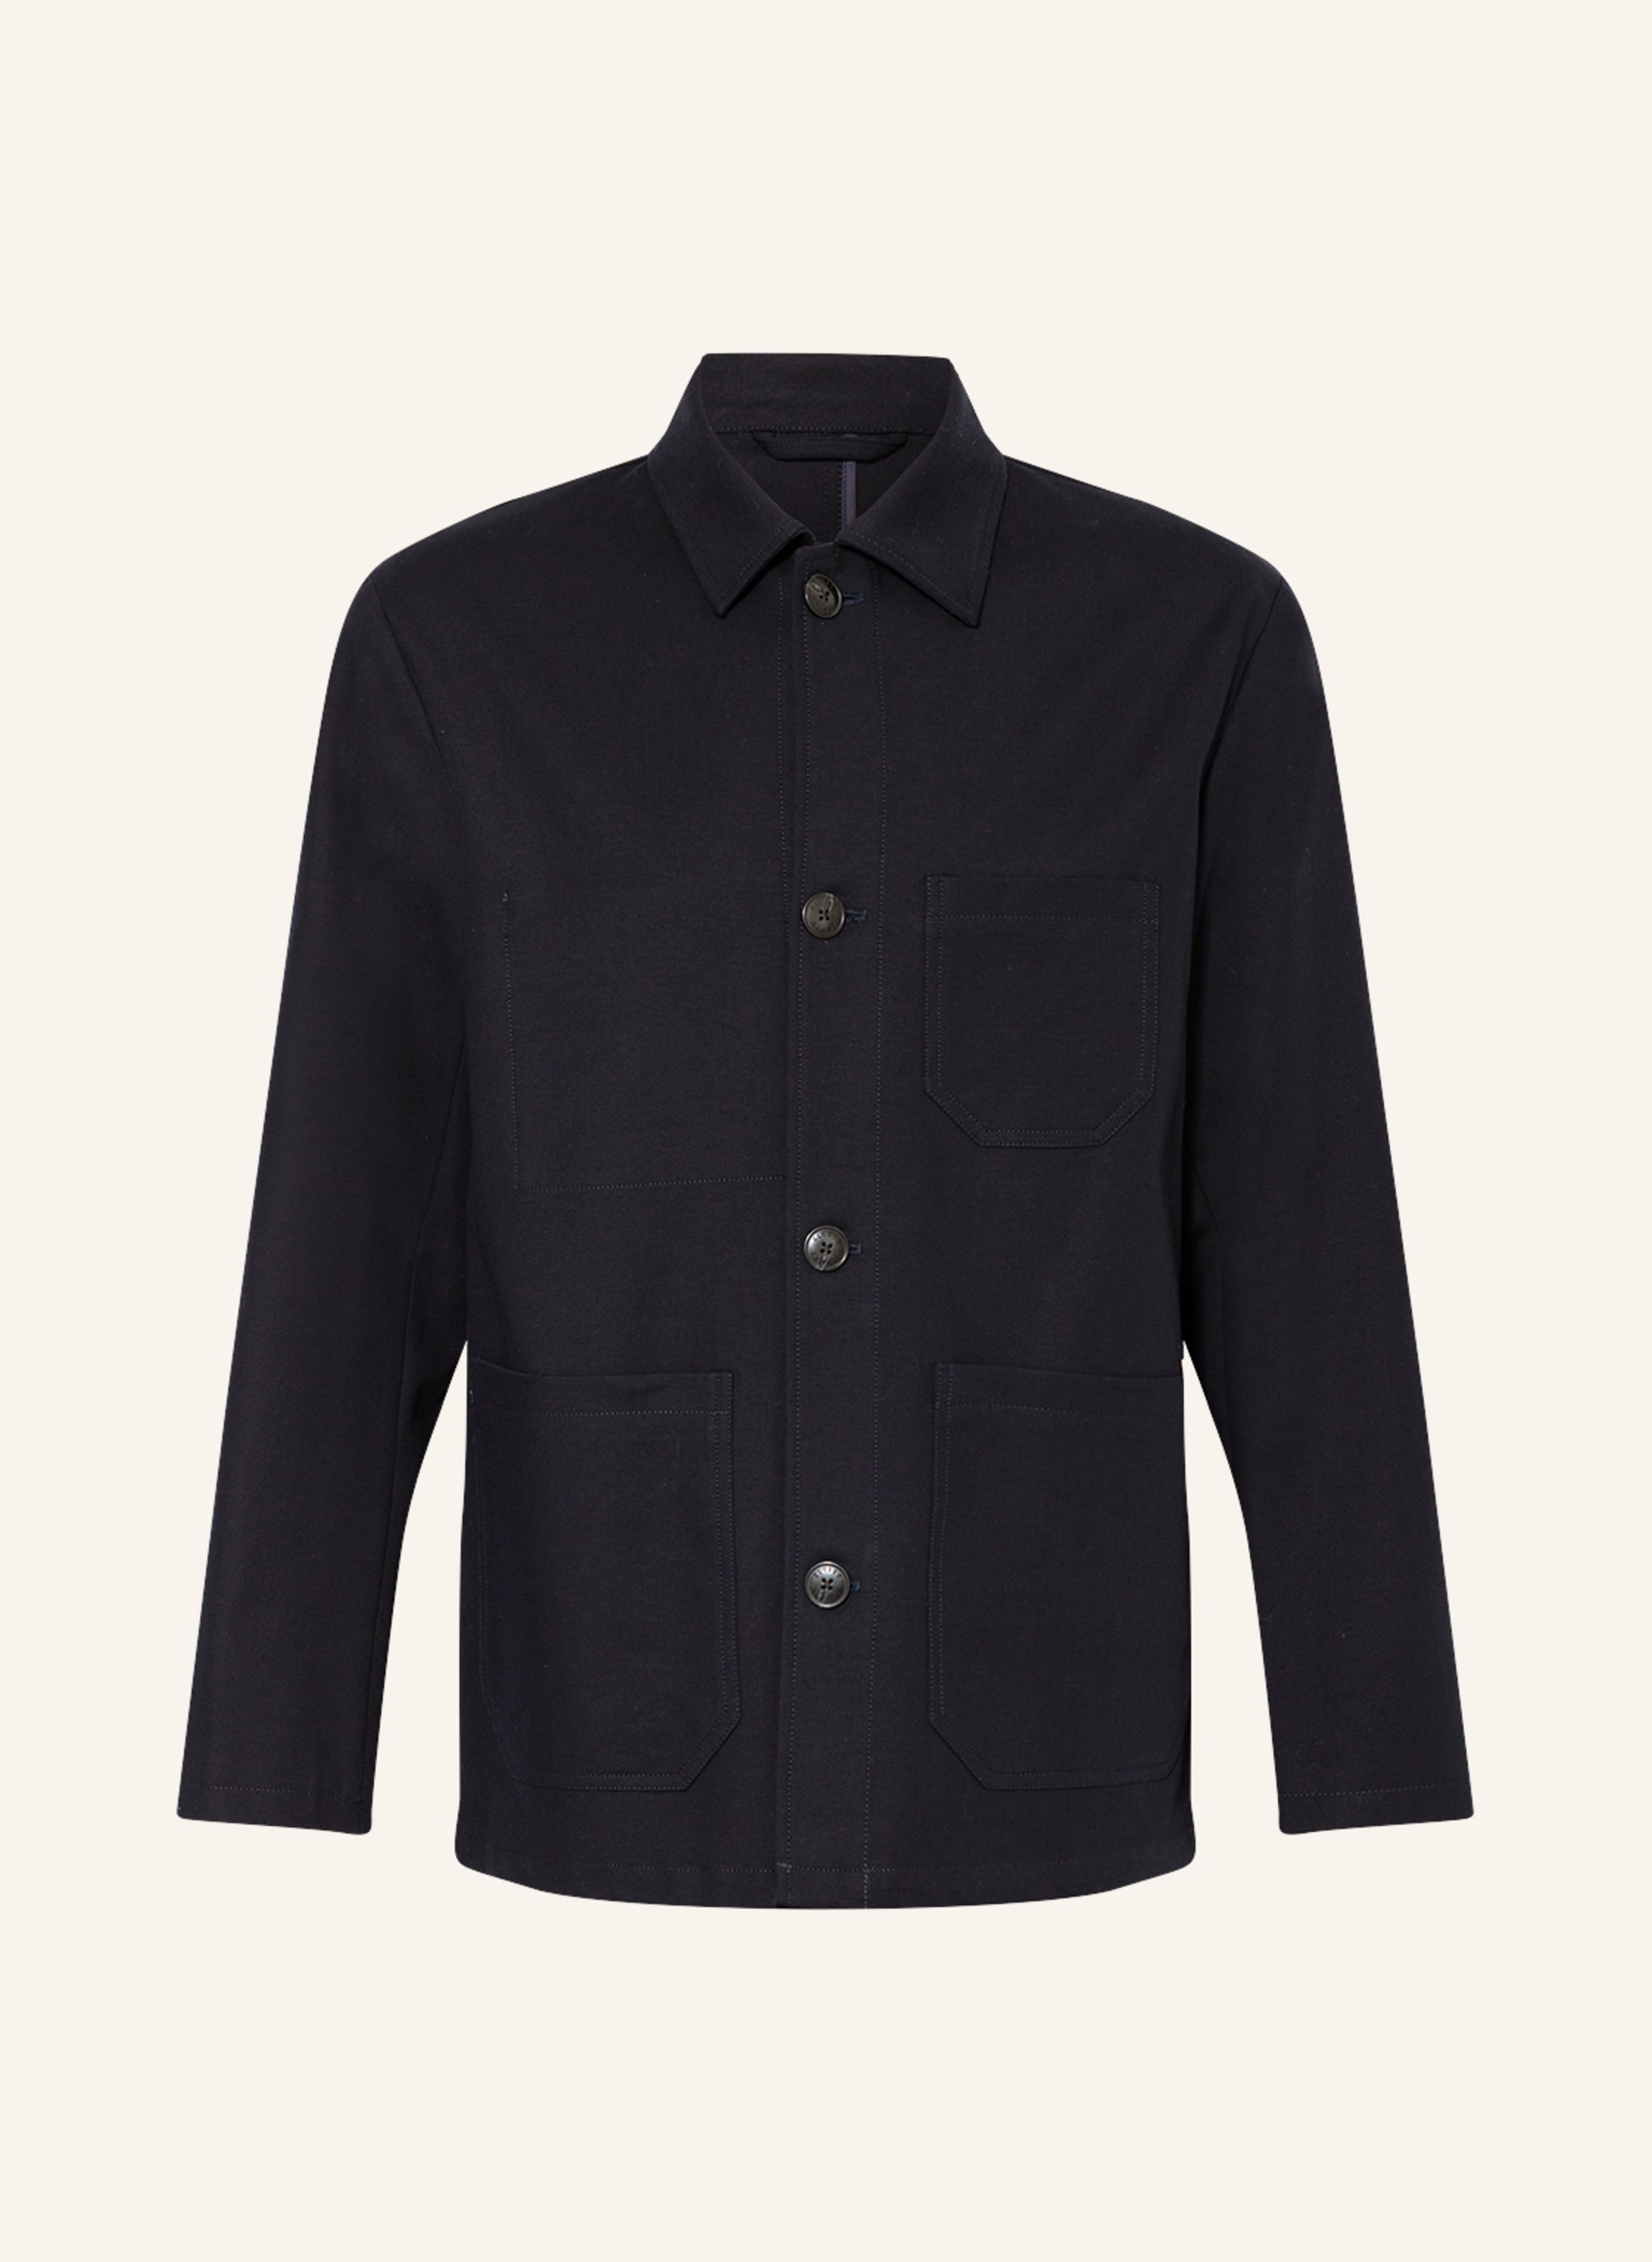 CLOSED Overshirt in dark blue & another color | Breuninger